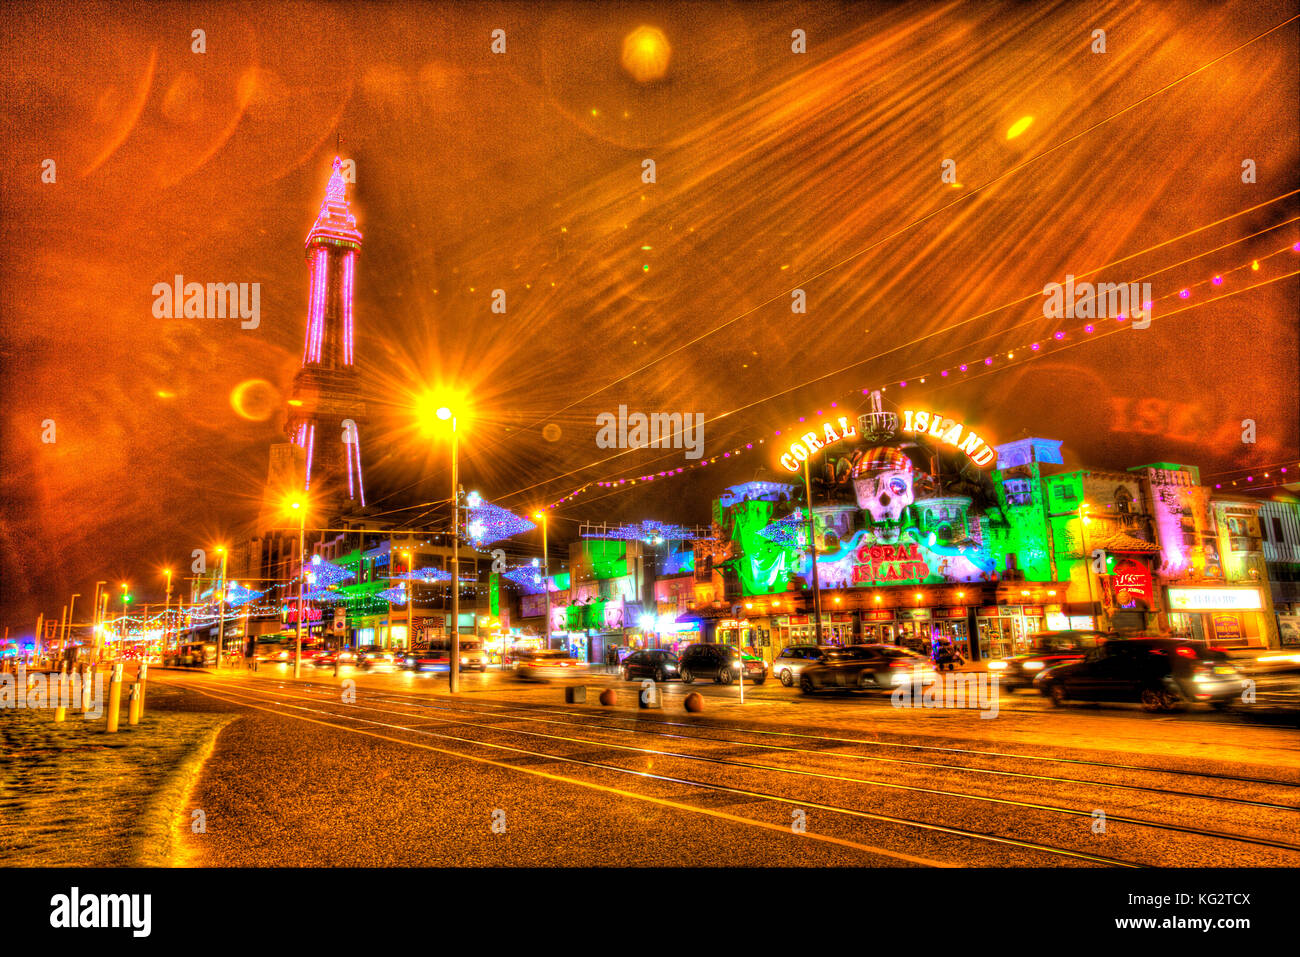 Town of Blackpool, England. Night view of Blackpool Illuminations and Blackpool Tower. This photograph has been produced by merging three differently  Stock Photo